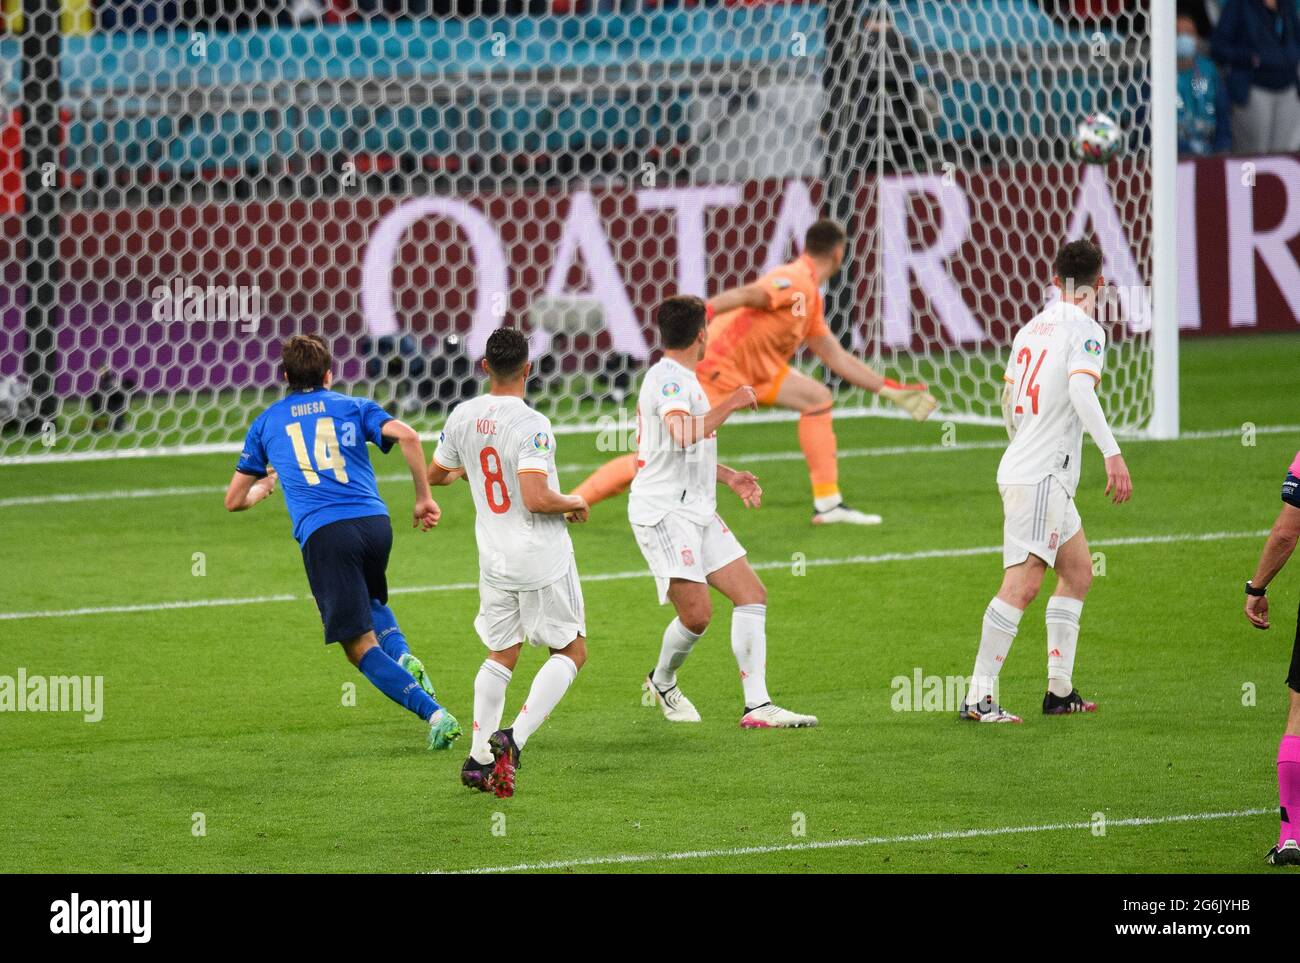 07 July 2021 - Italy v Spain - UEFA Euro 2020 Semi-Final - Wembley - London  Italy's Federico Chiesa shoots and scores the opening goal Picture Credit : © Mark Pain / Alamy Live News Stock Photo